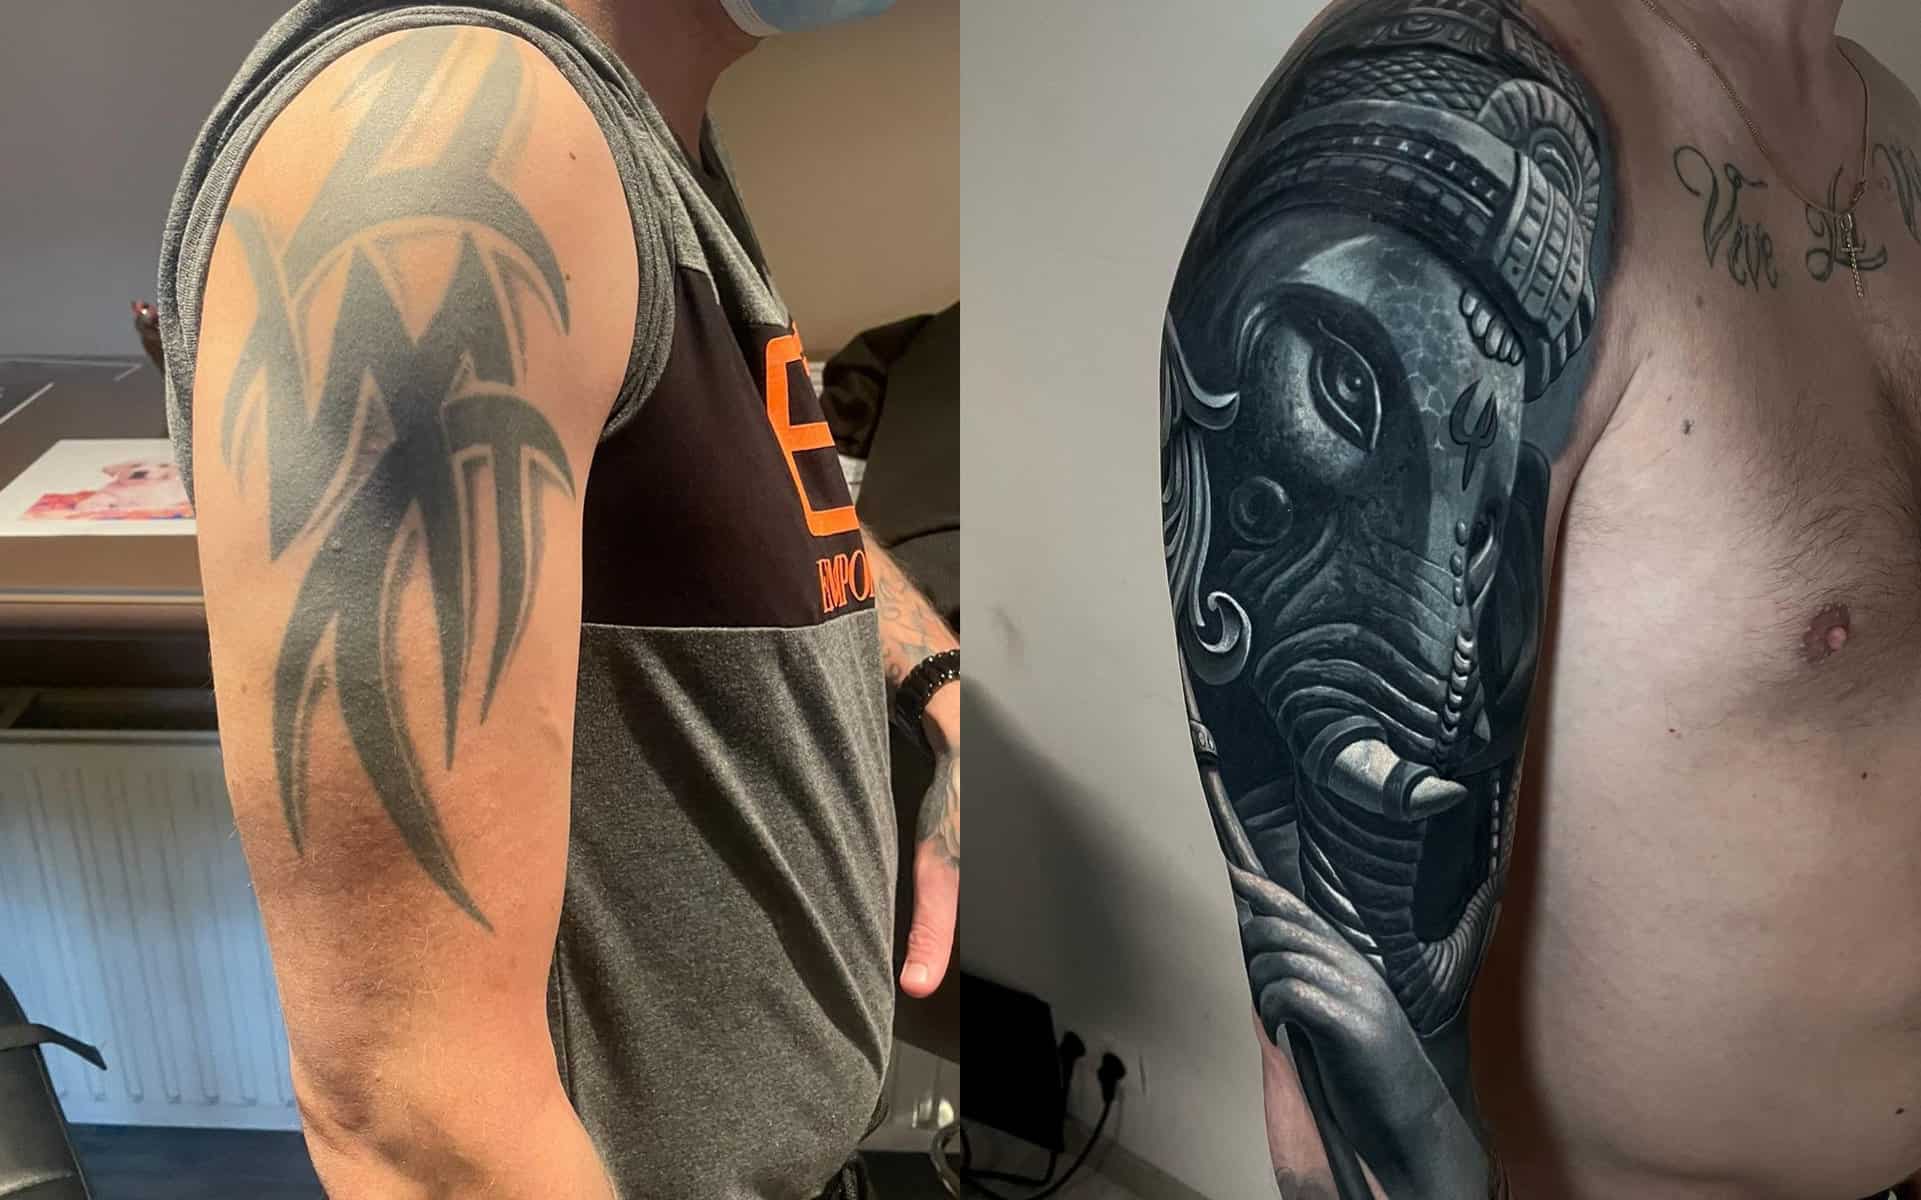 Can You Cover Up An Existing Tattoo?